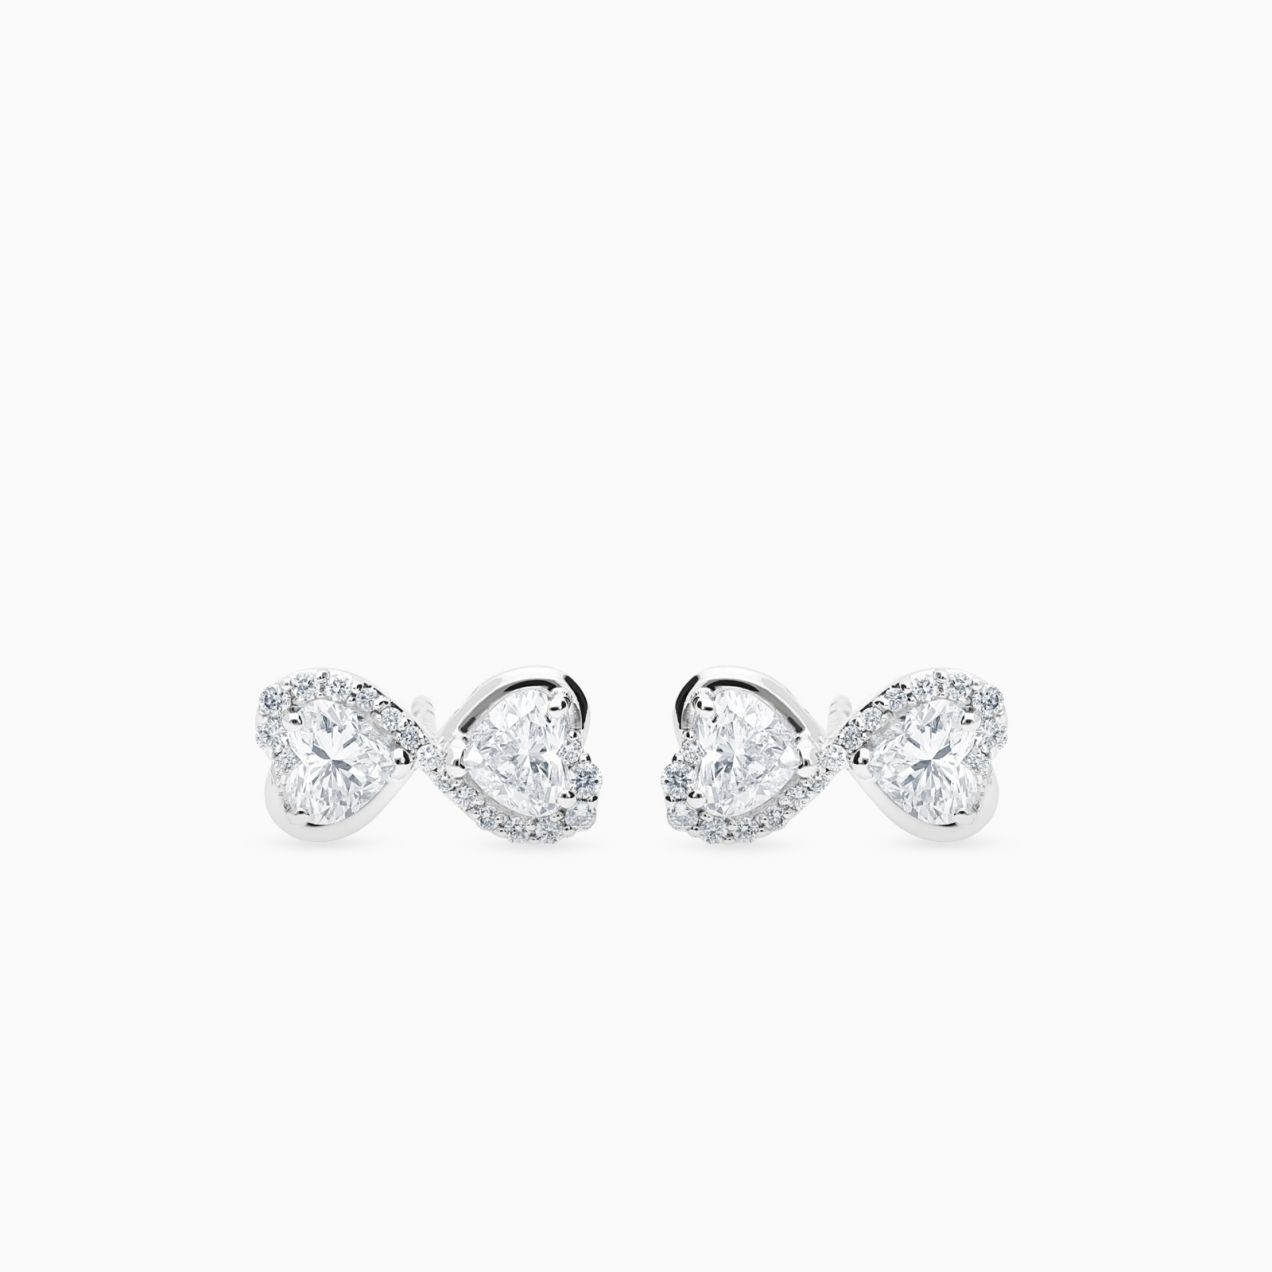 White gold button infinity symbol earrings with heart-cut diamonds and diamonds